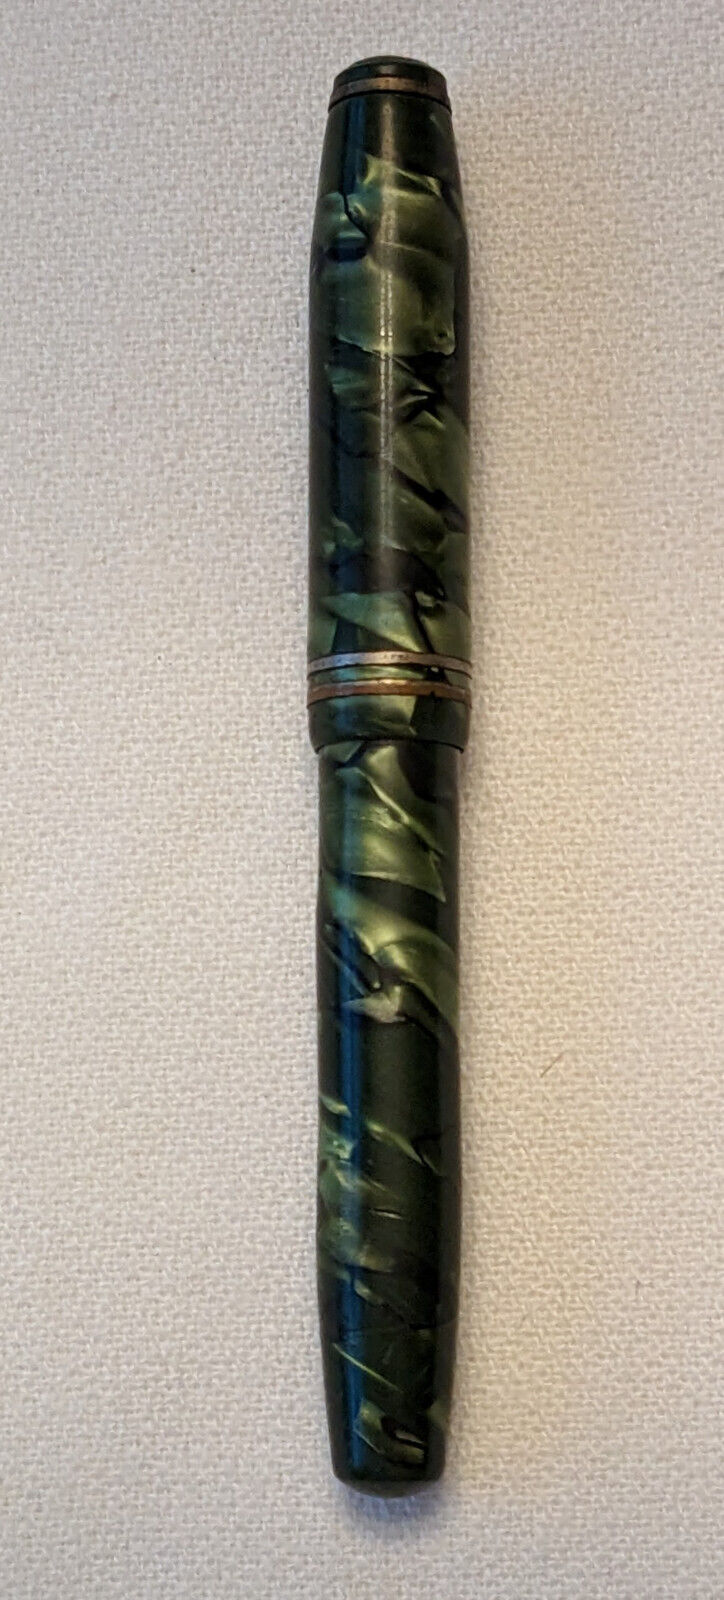 Vintage KREKO Fountain Pen Green and Black Marbled Celluloid